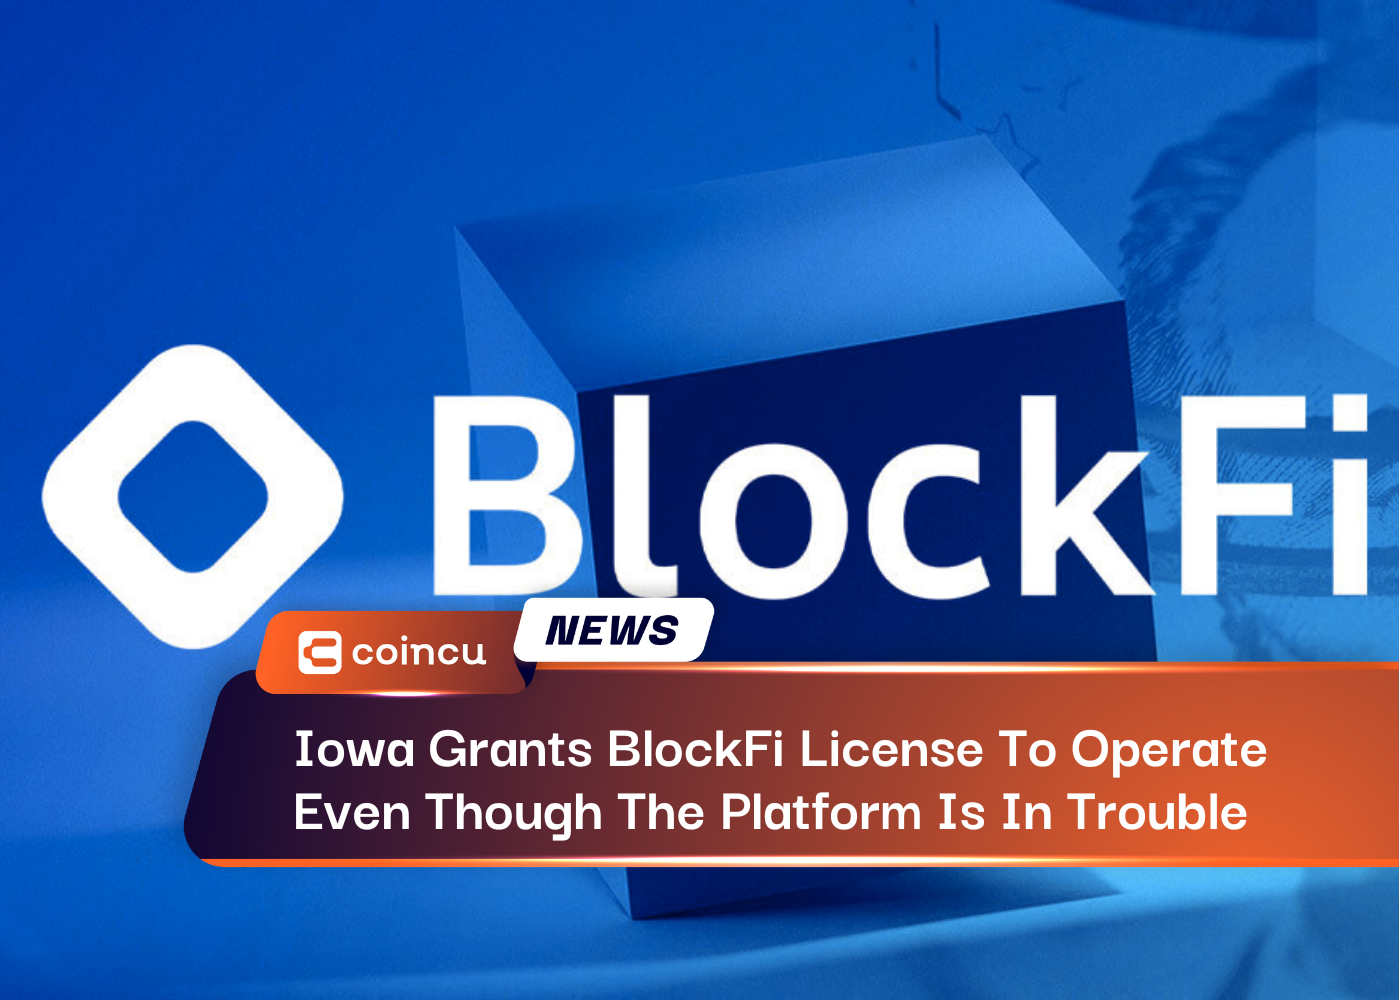 Iowa Grants BlockFi License To Operate Even Though The Platform Is In Trouble